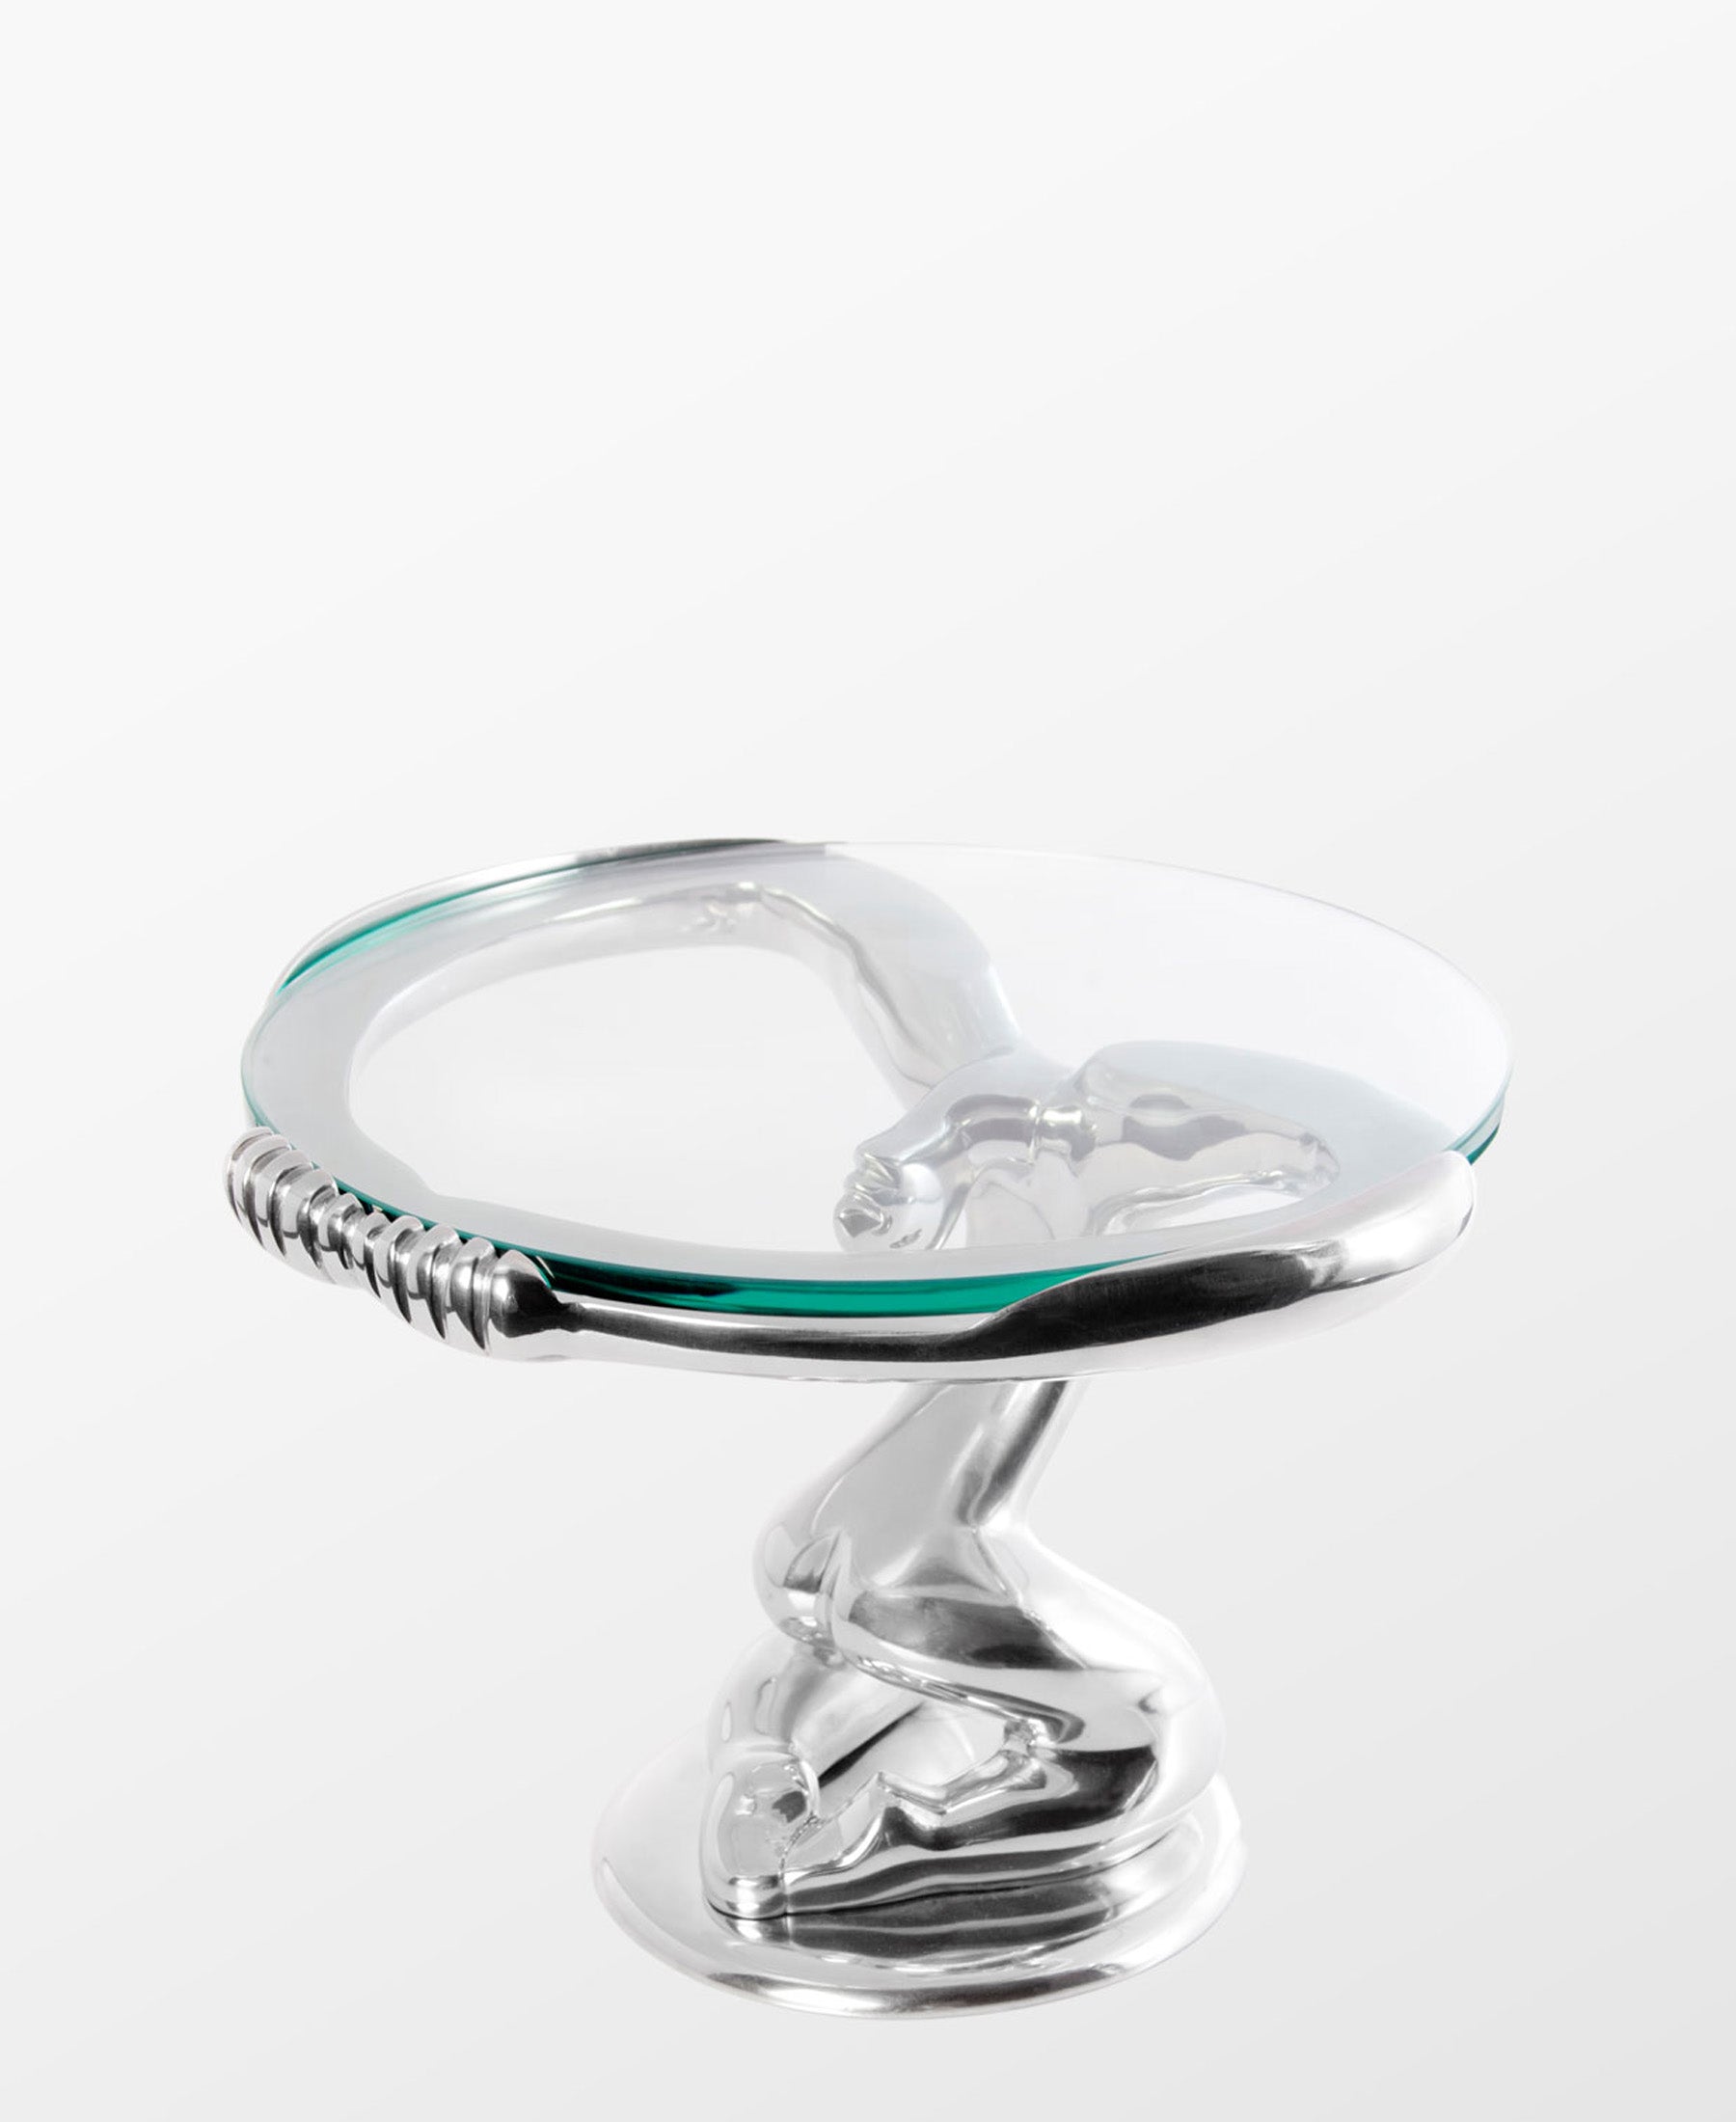 Carrol Boyes Cake Stand A Piece Of Cake - Silver